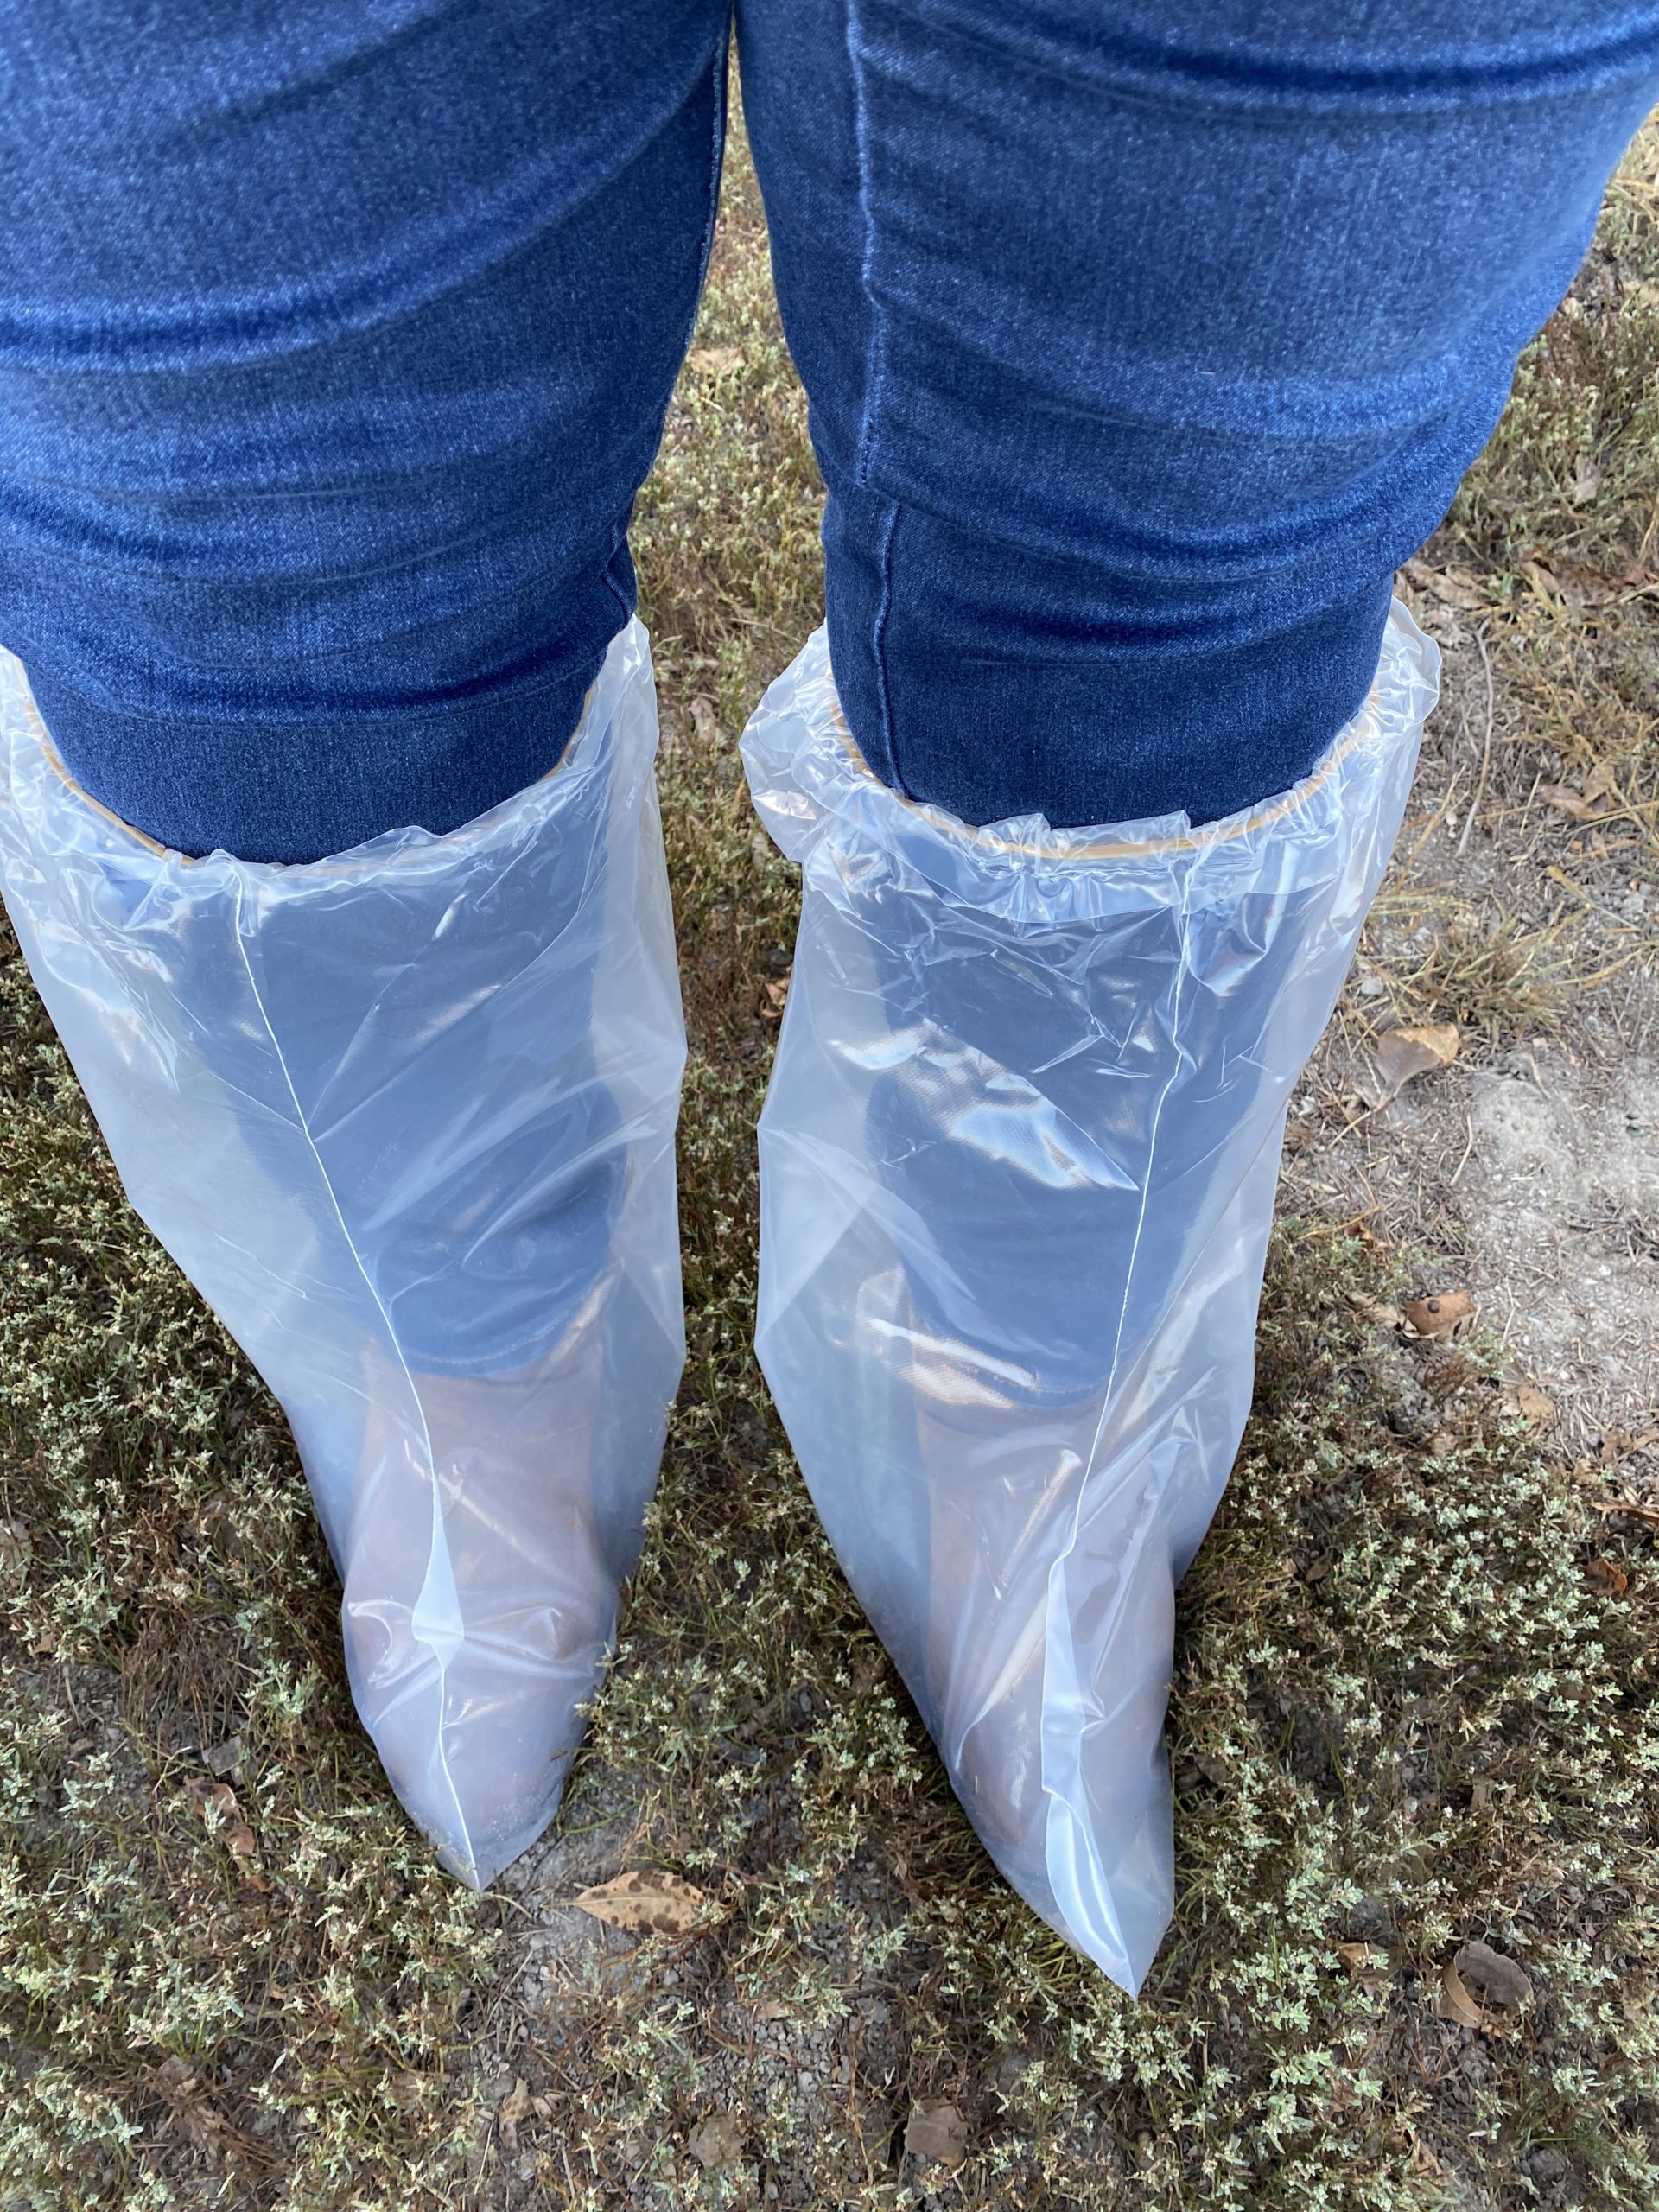 Plastic coverings for my shoes on the pig farm. 